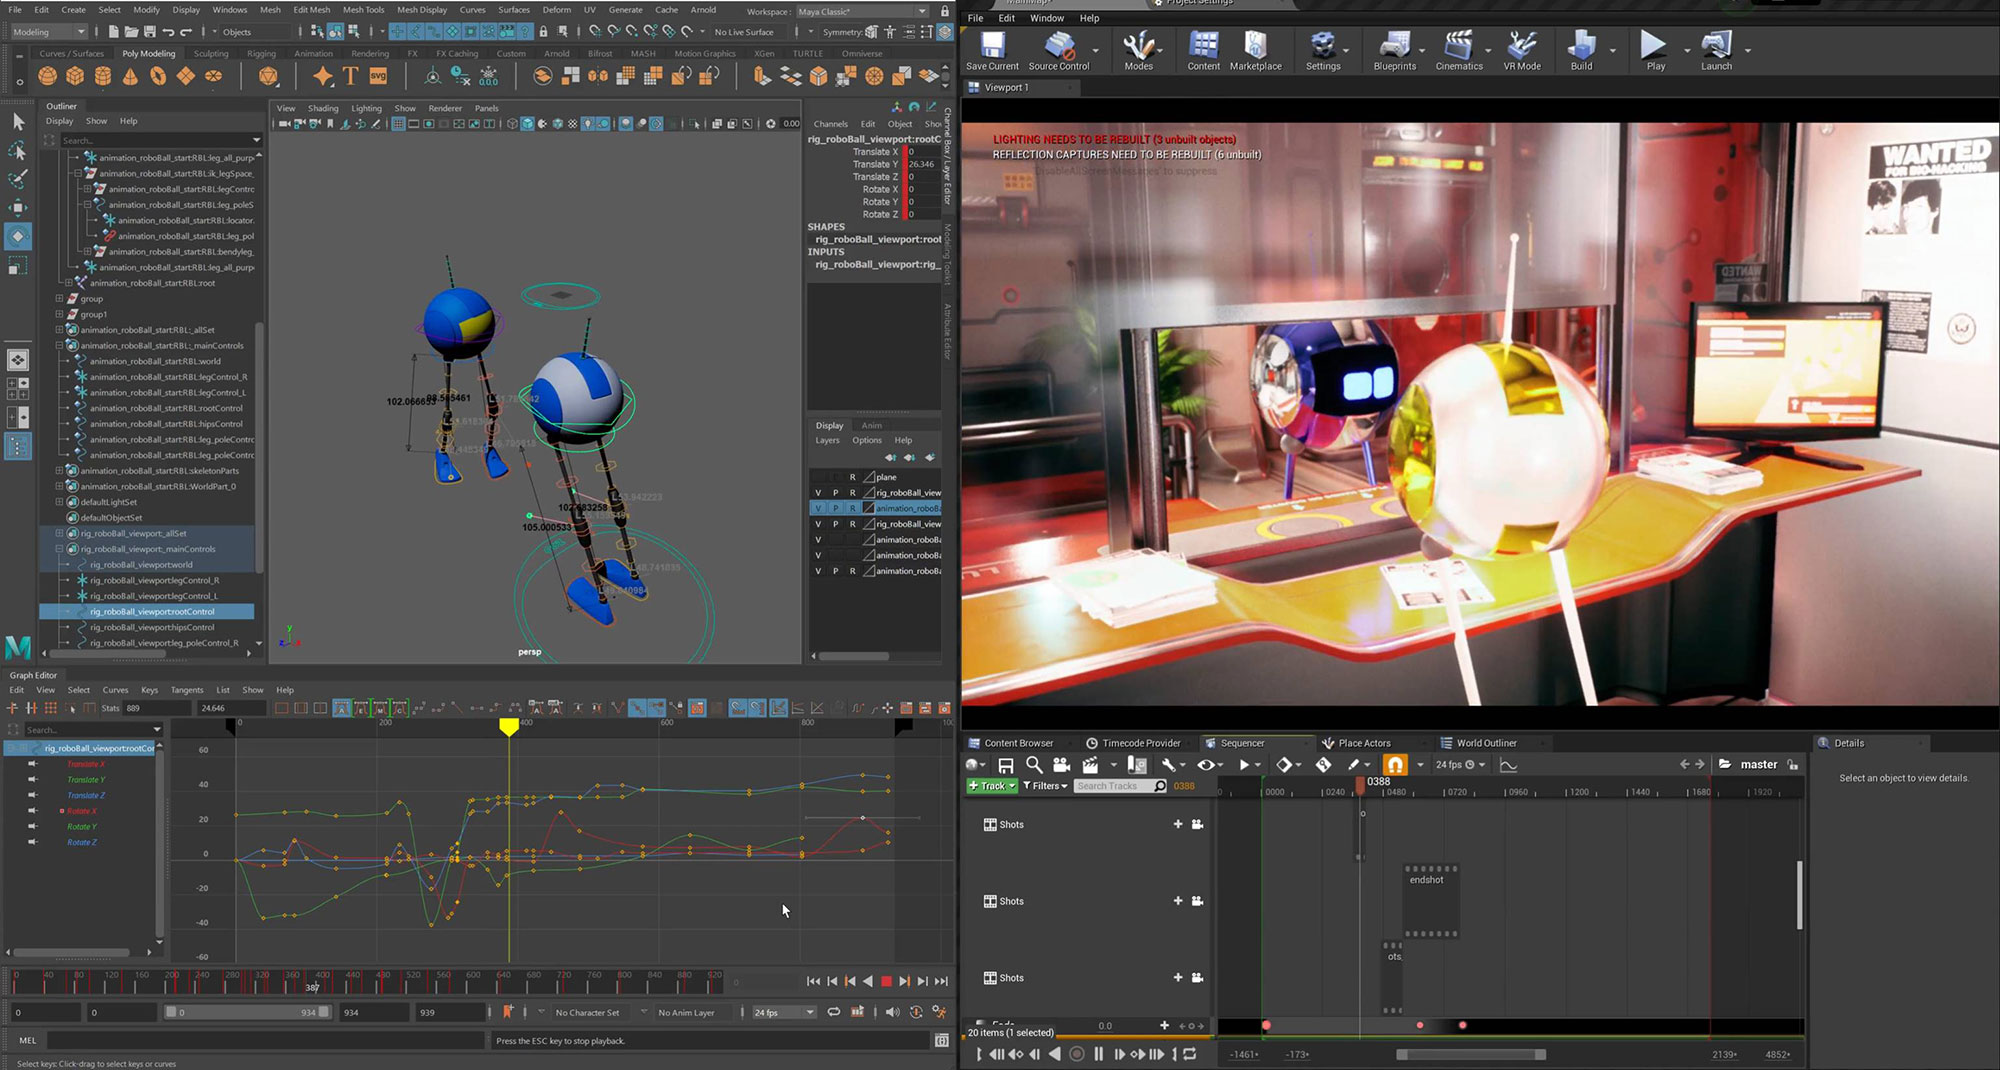 New Unreal plugin for Autodesk Maya is ideal for Virtual Production